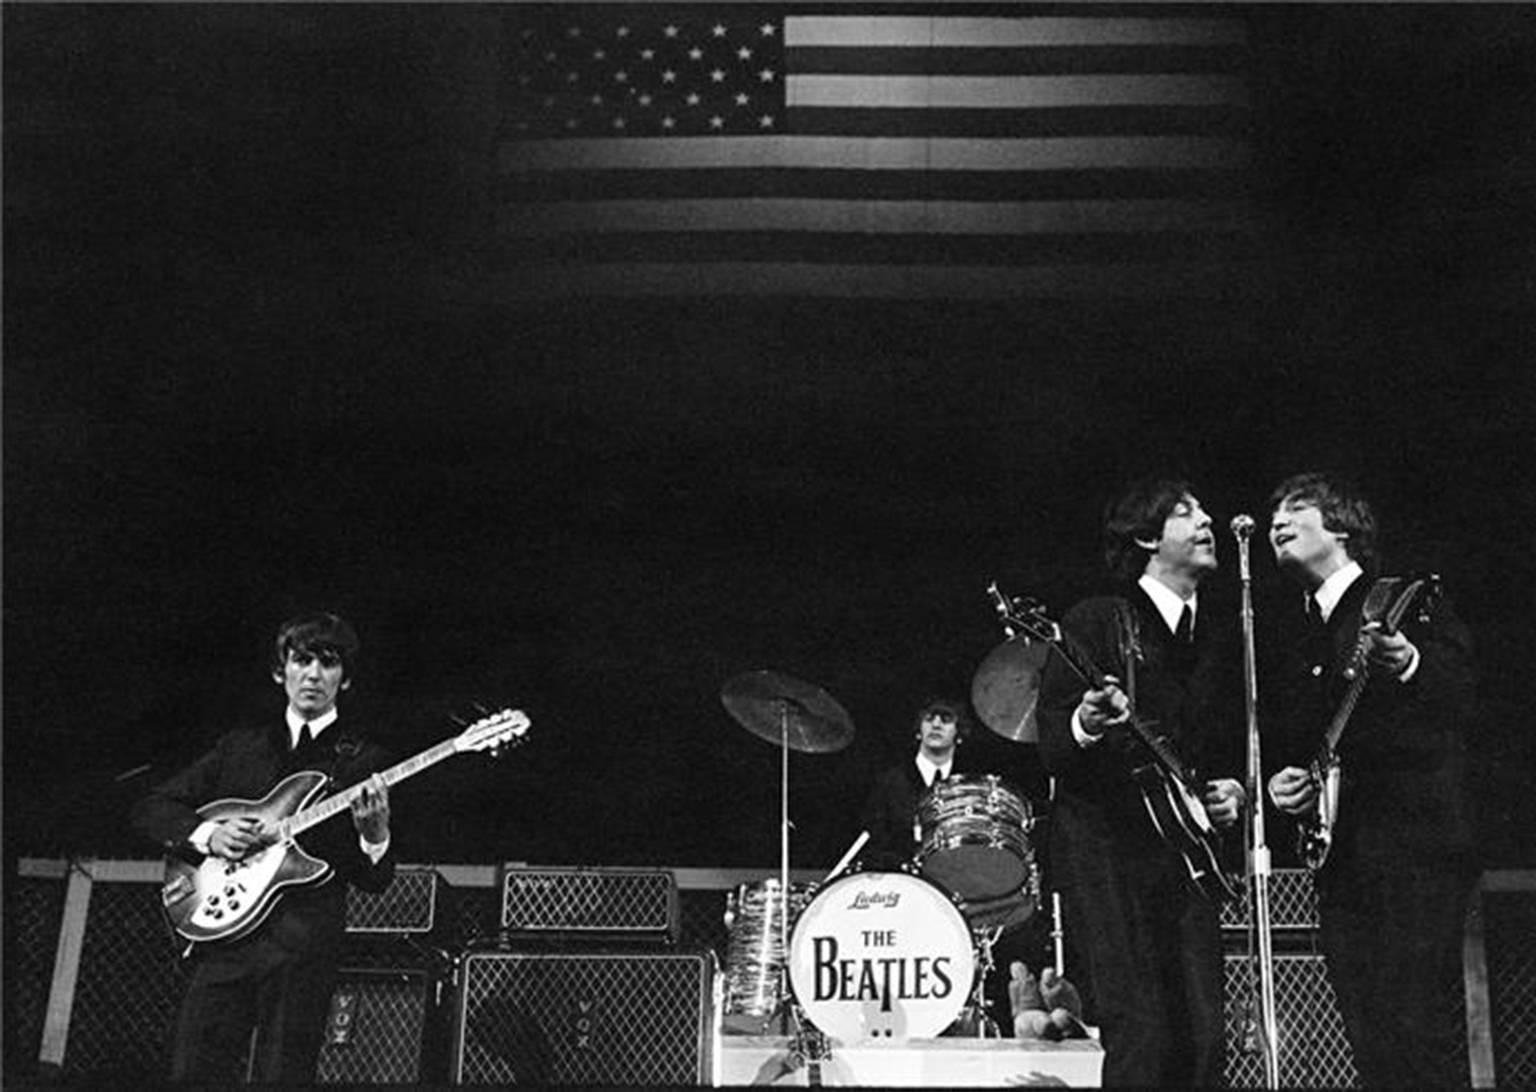 Curt Gunther Black and White Photograph - The Beatles on Stage